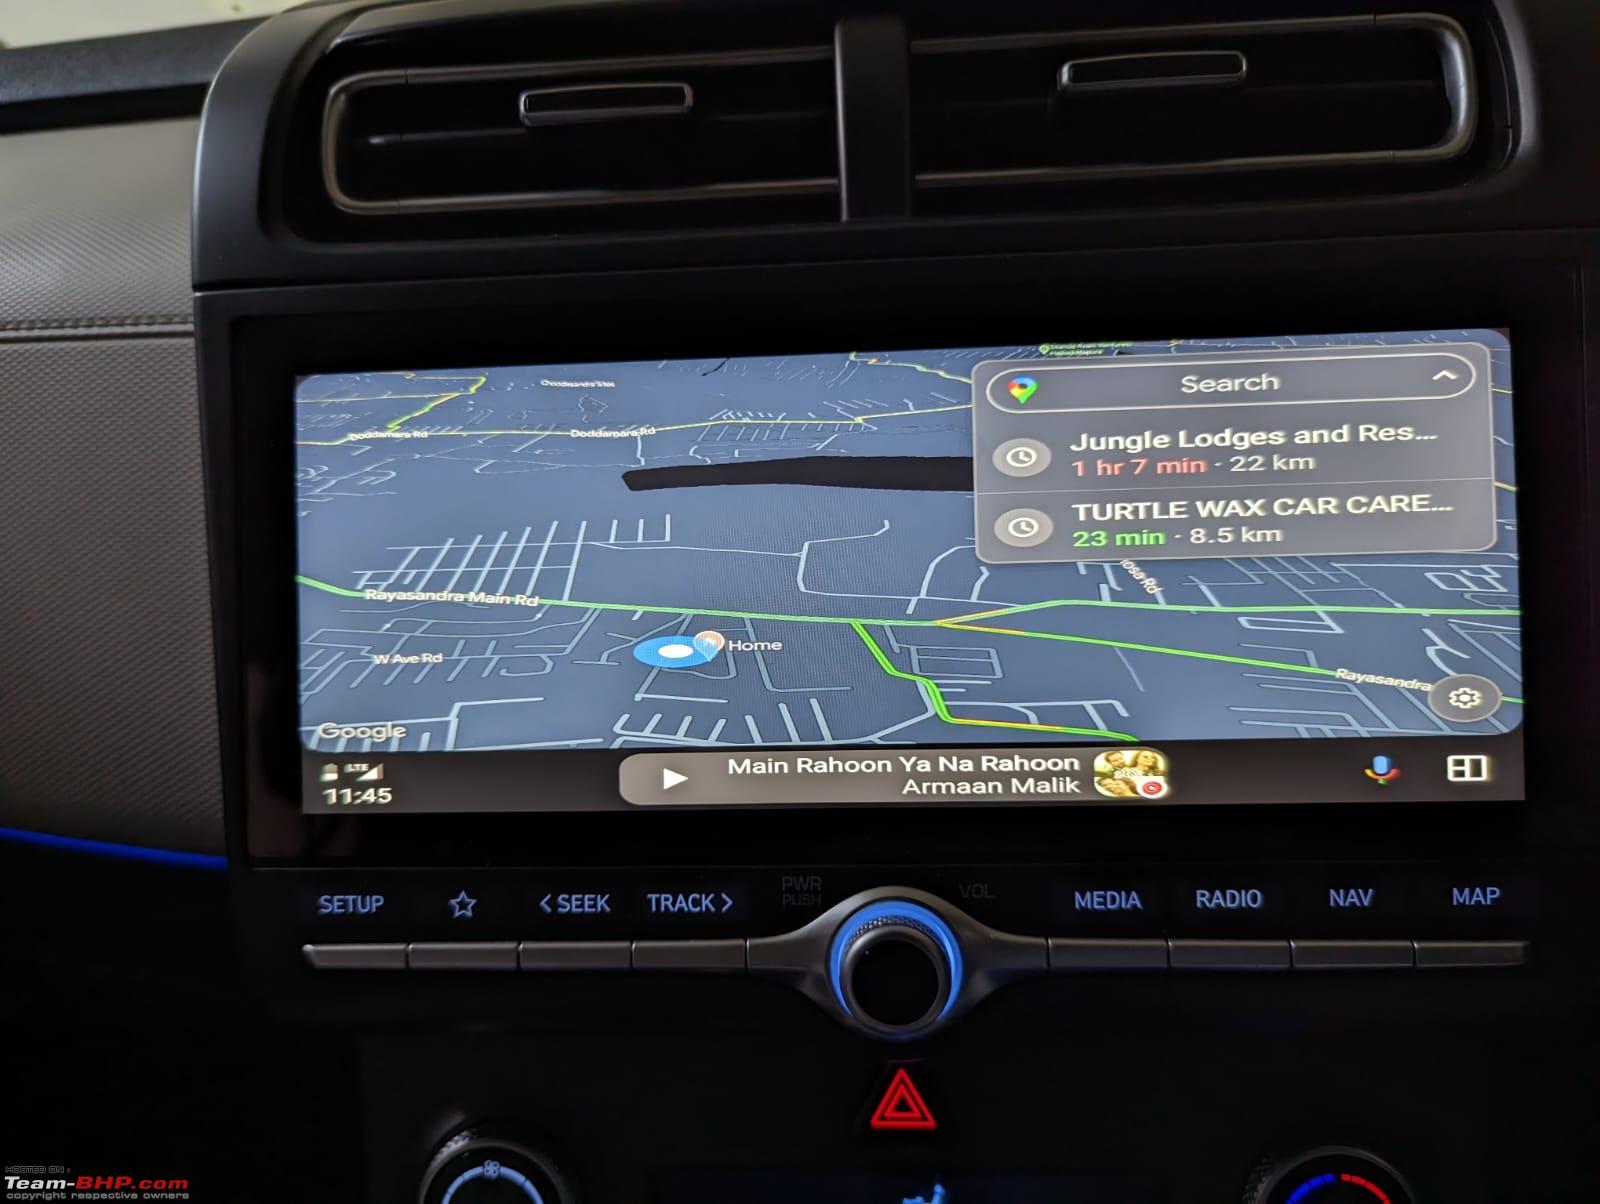 Carlinkit 4.0 unable to auto adjust to my cars Infotainment screen